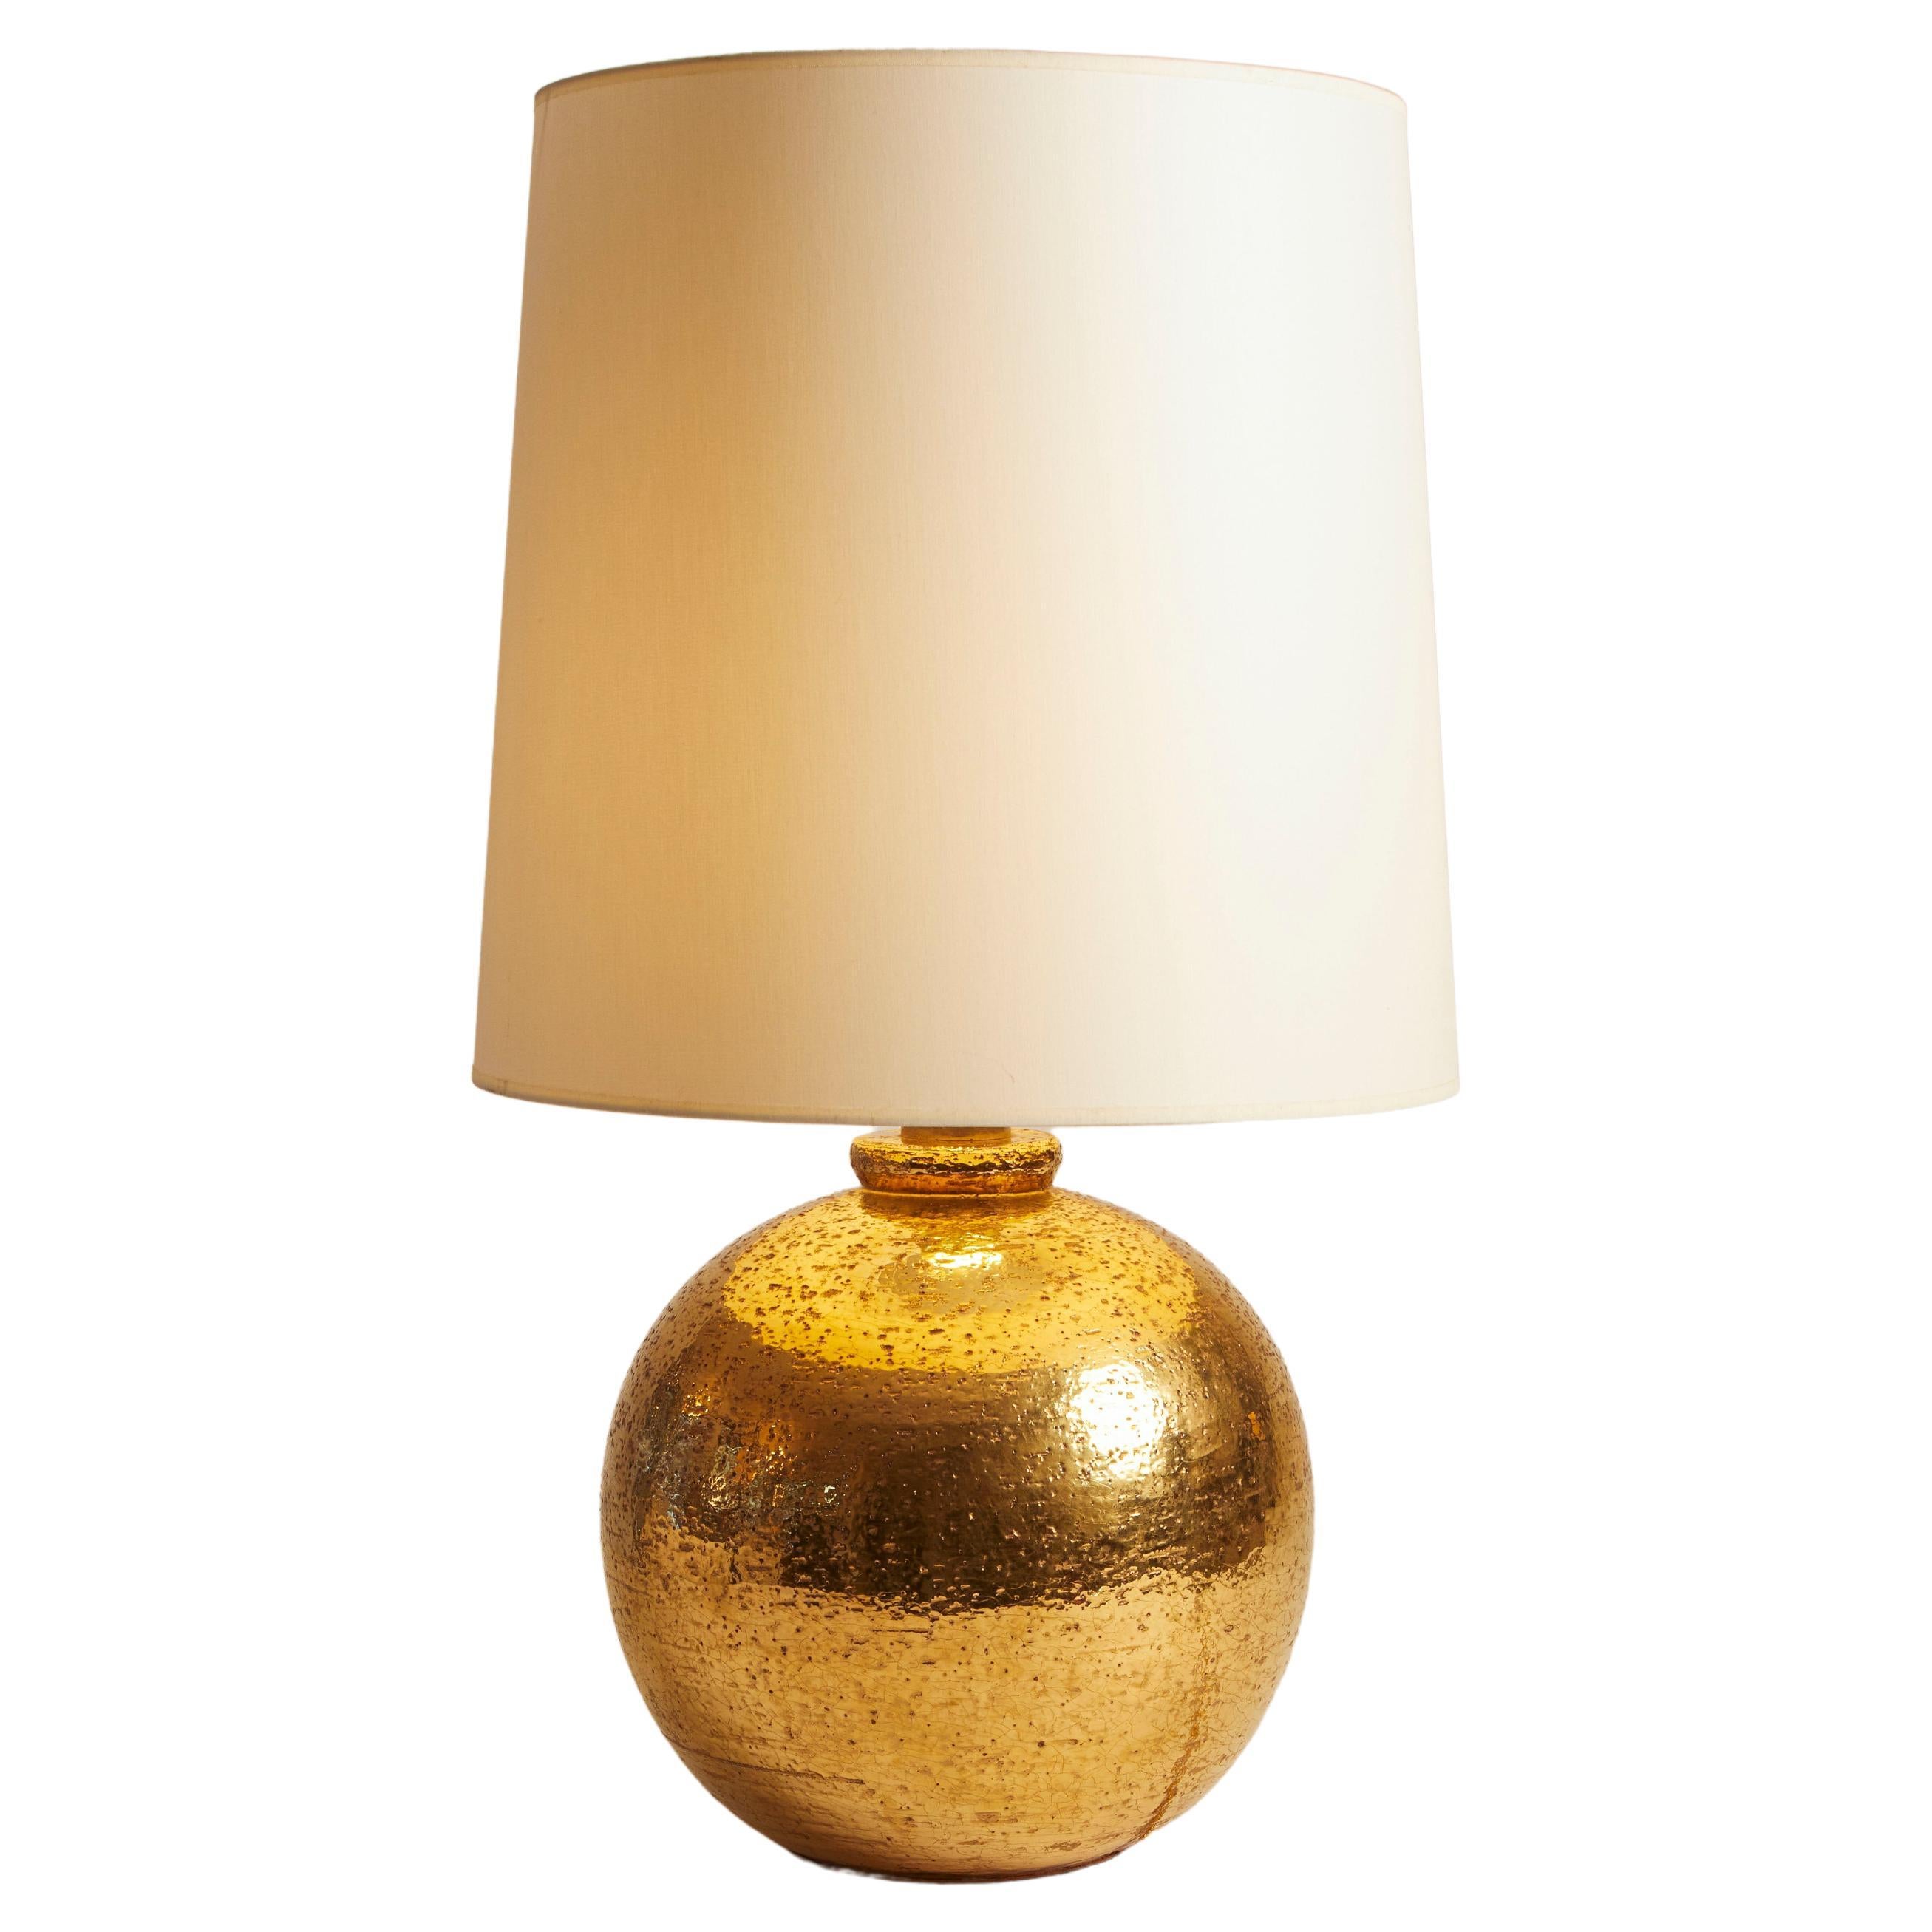 Italian 1960's Bitossi Gilded Pottery Lamp For Sale